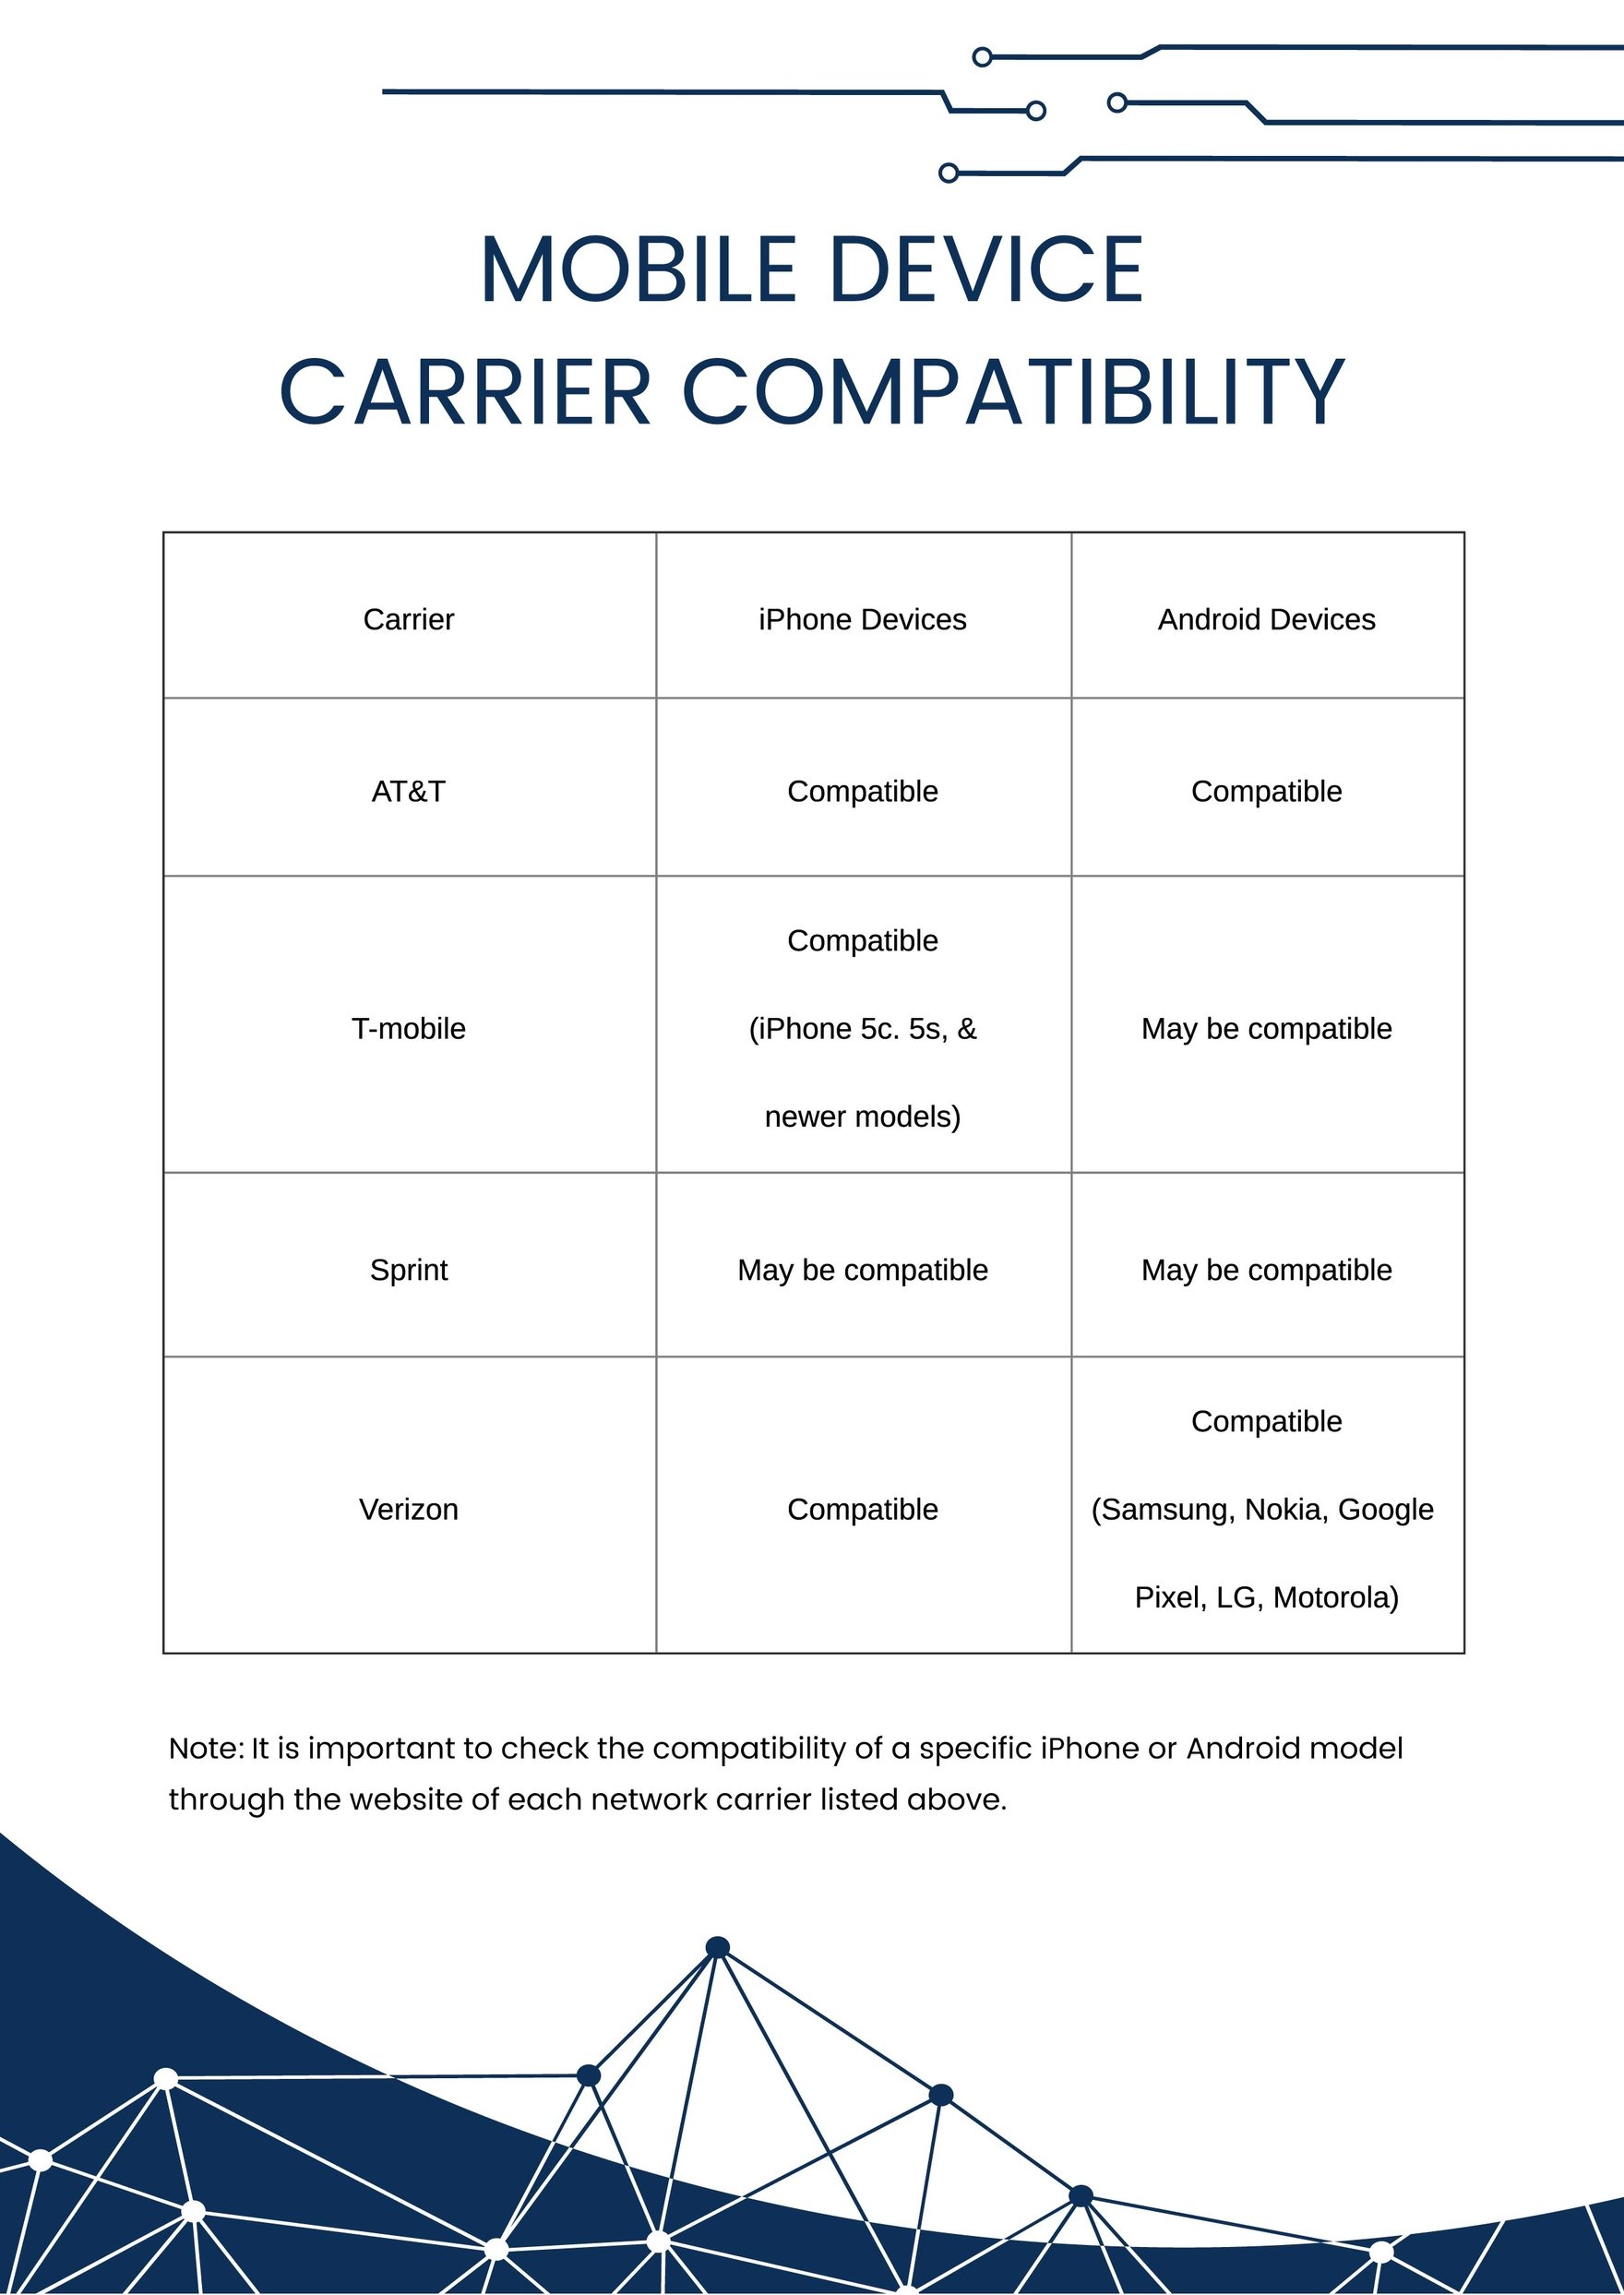 Free Carrier Compatibility Chart in PDF, Illustrator